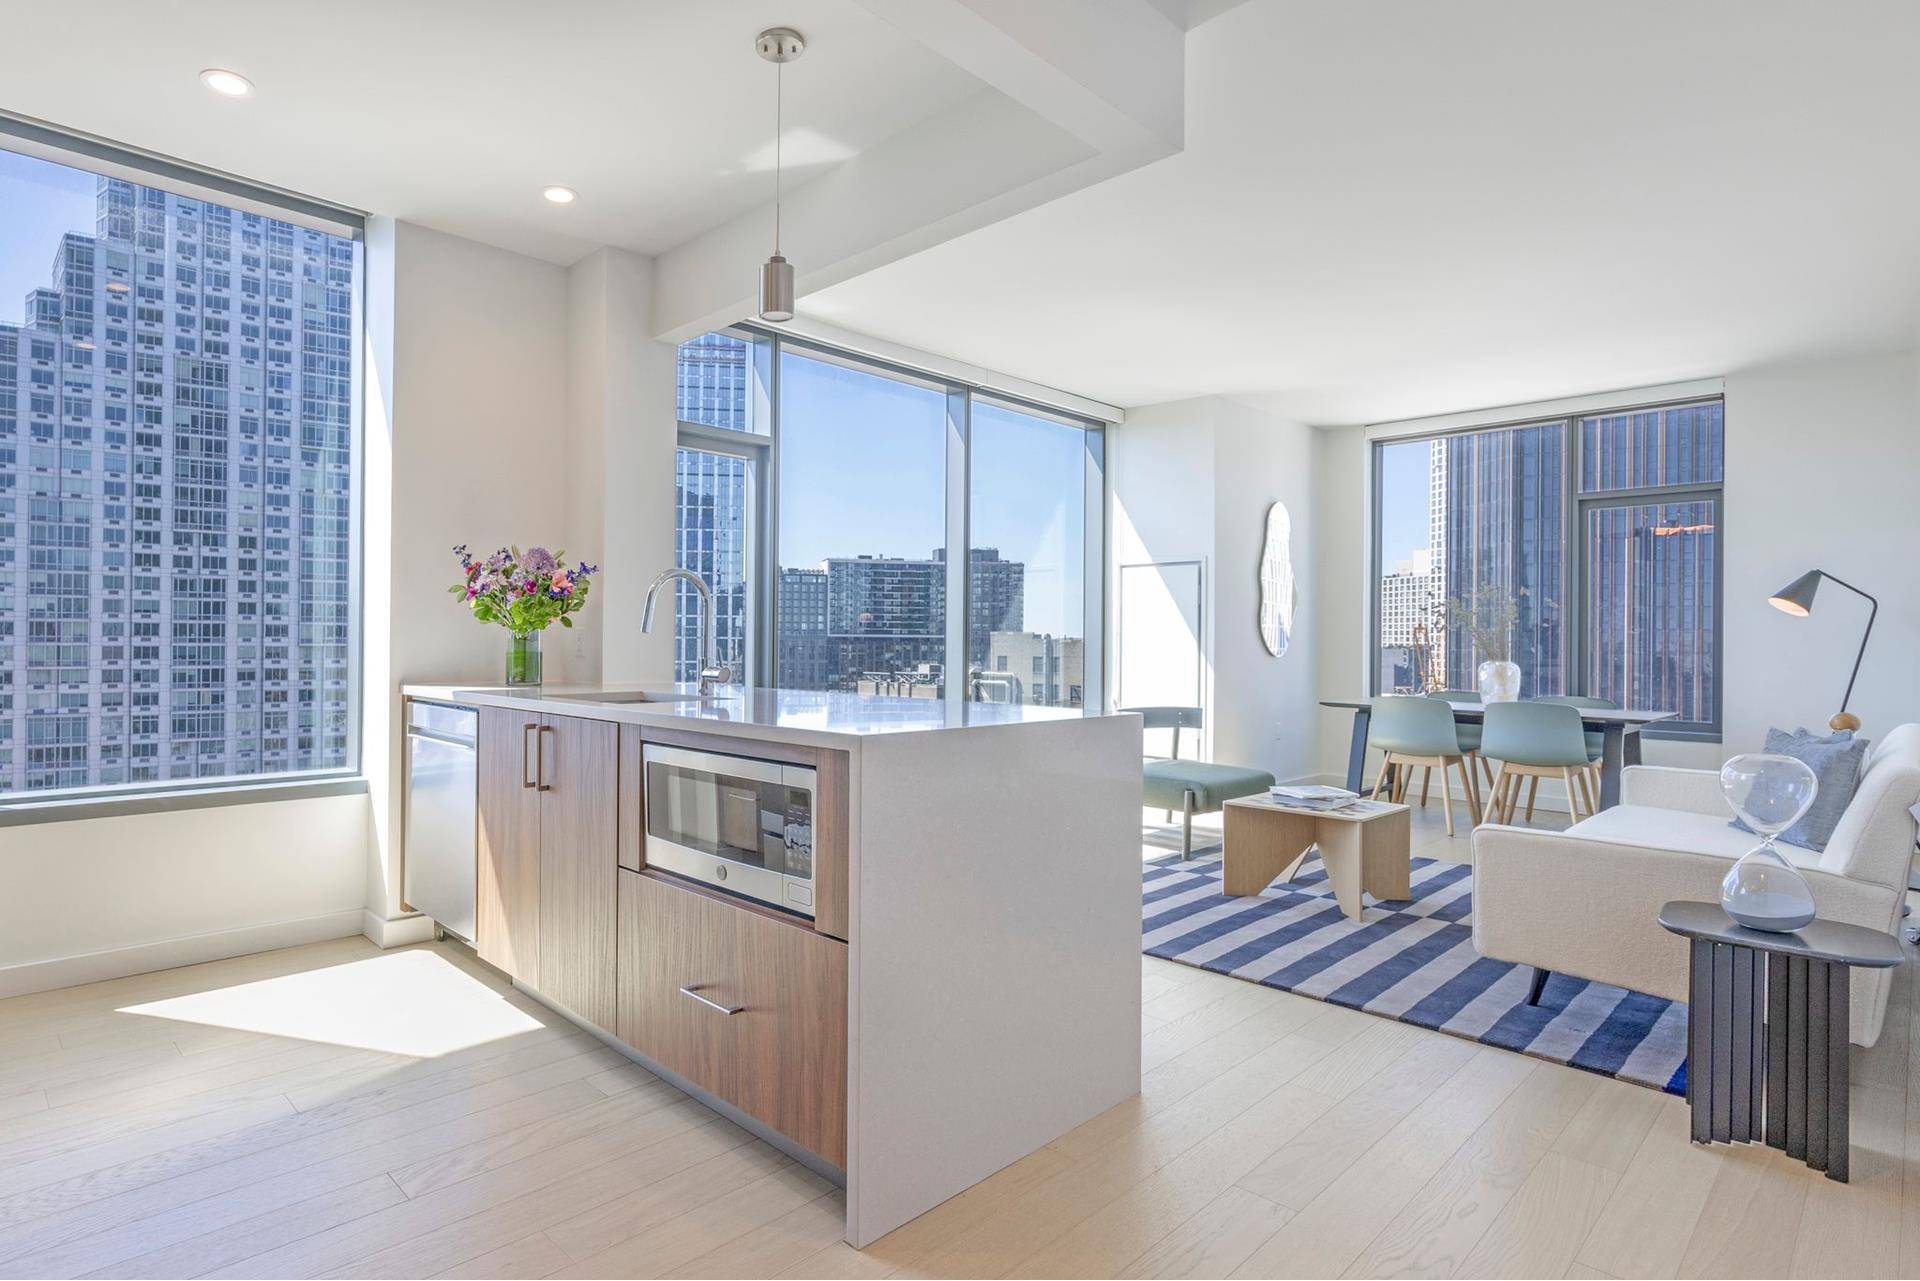 PREMIUM RESIDENCE COLLECTION BEAUTIFUL CORNER 2 BEDROOM WITH MULTIPLE EXPOSURES AND BREATHTAKING VIEWS OVERLOOKING THE MANHATTAN SKYLINE, EAST RIVER, SUNSETS, FT.